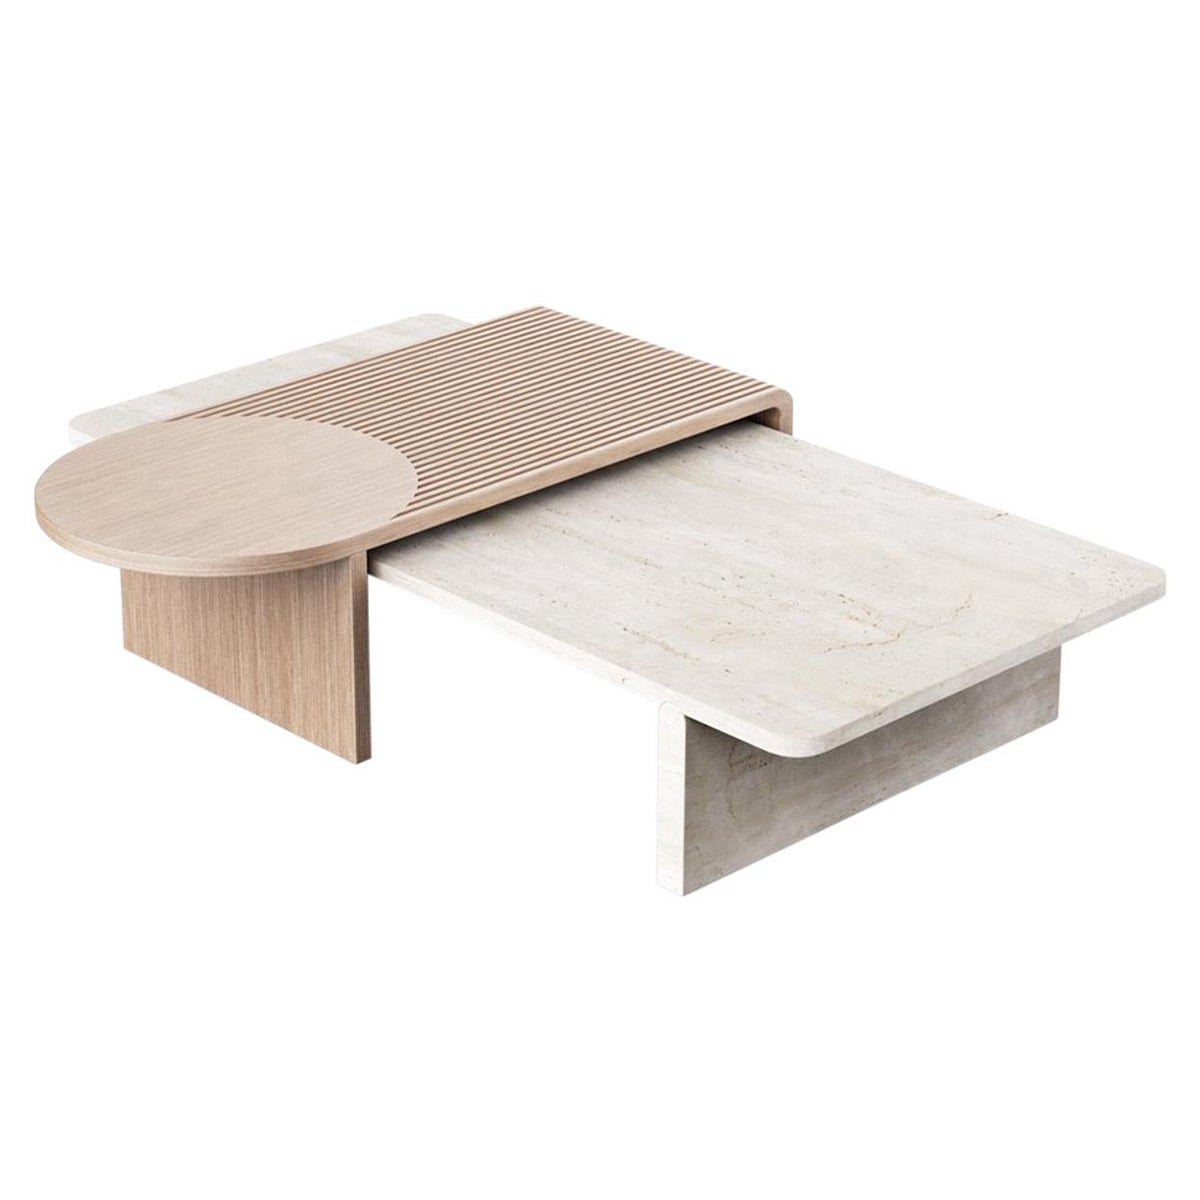 Sculpted Contemporary Travertine and Oak Table by Dooq